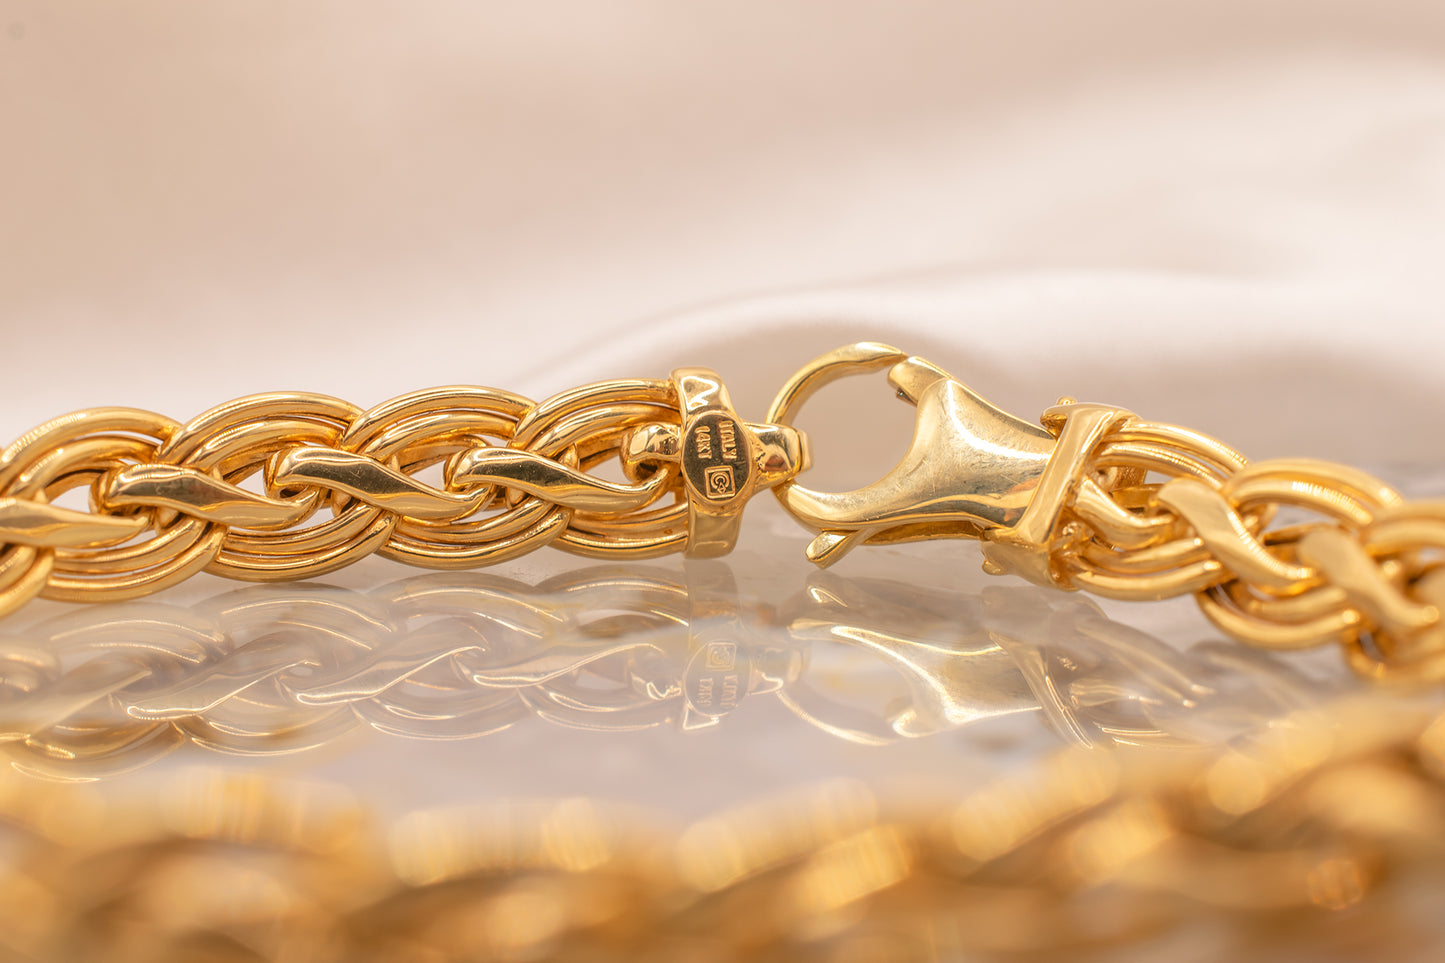 Vintage Estate 14K Yellow Gold Italian Braided Bracelet With Large Lobster Clasp 8mm 7 Inches